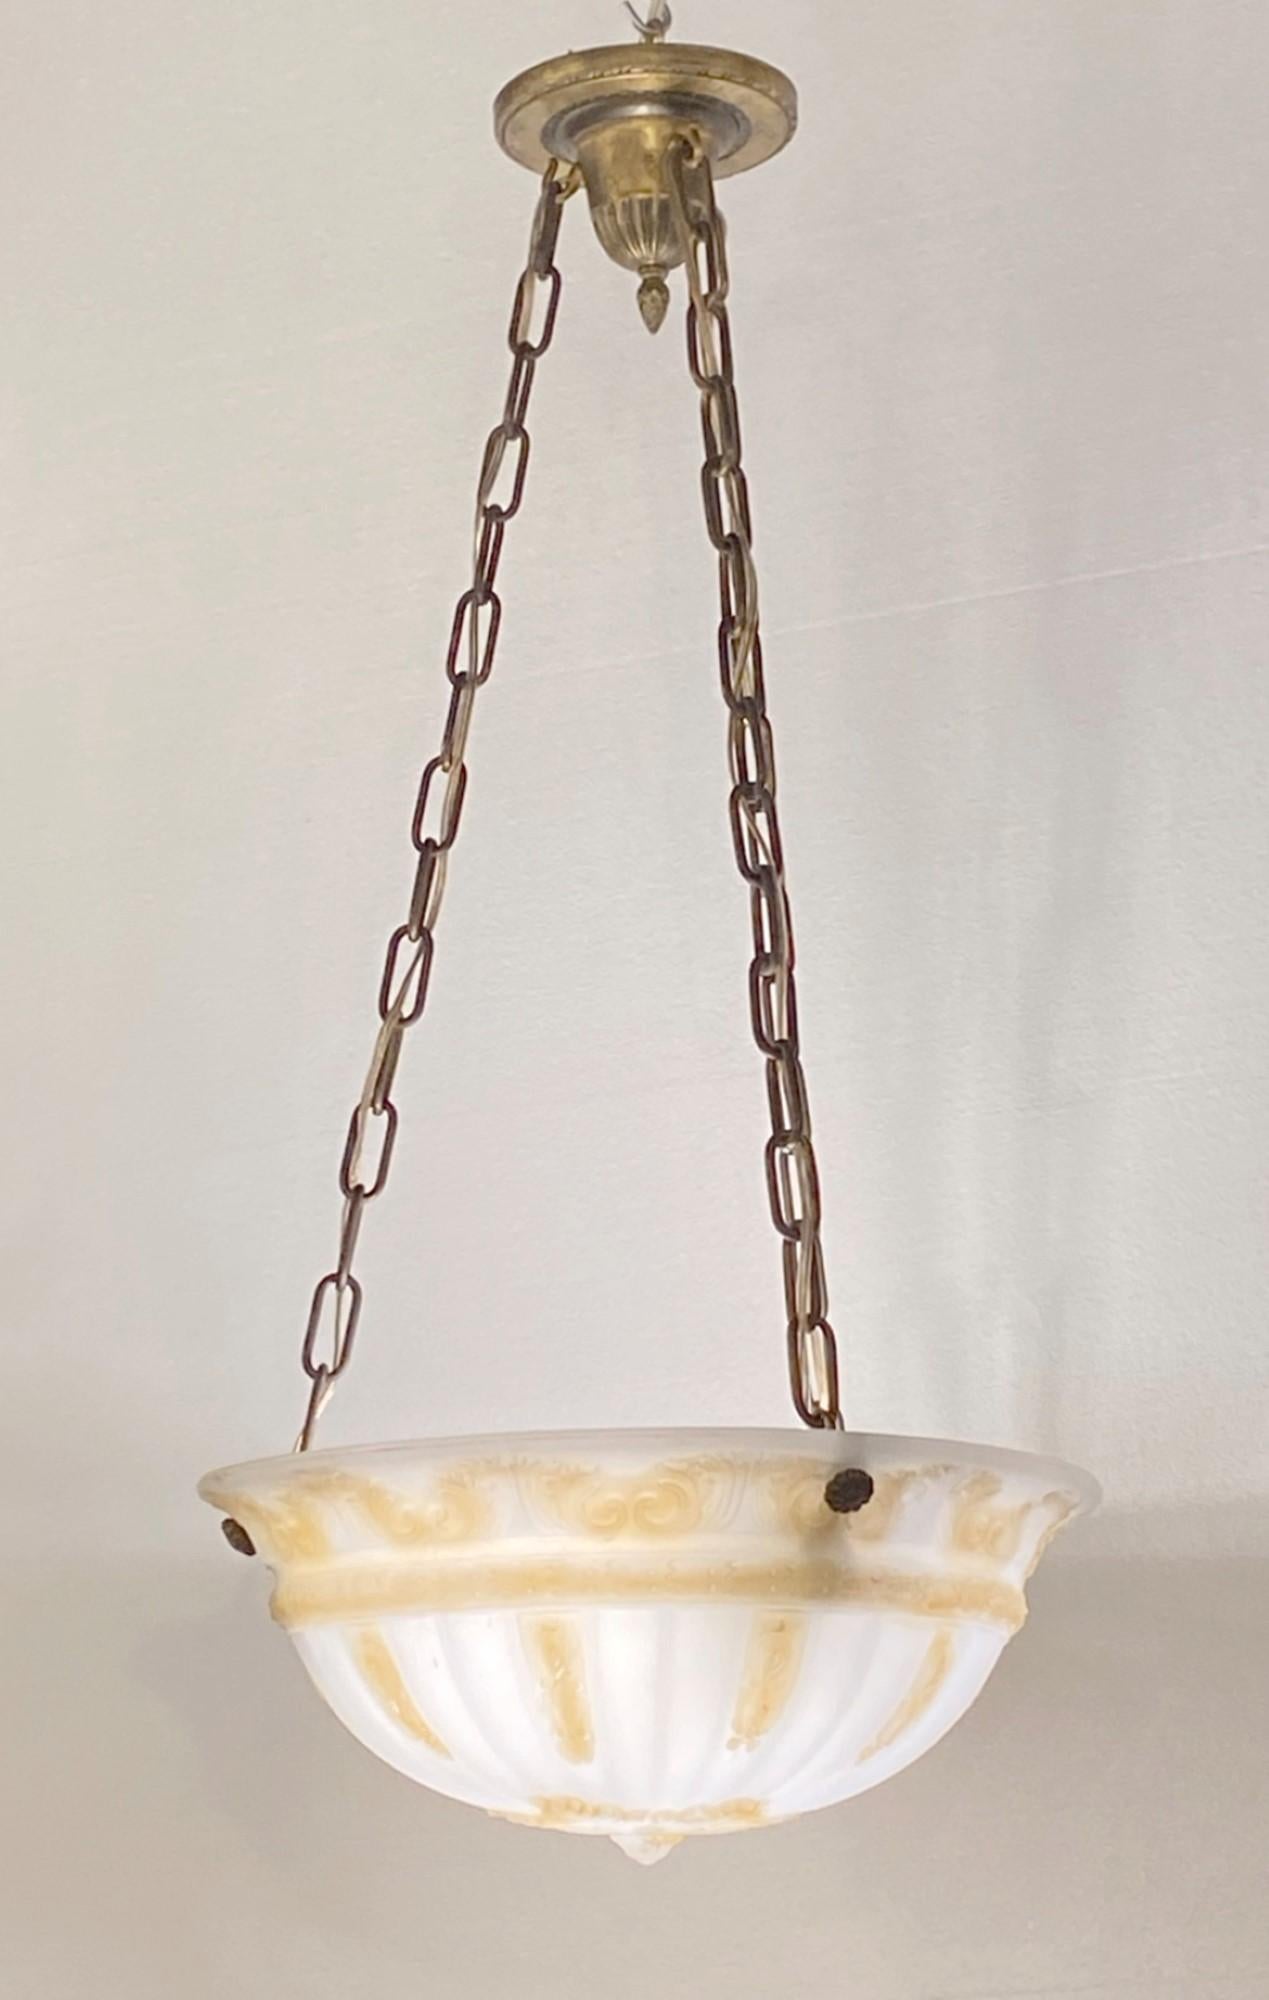 Early 1900s white cast glass dish light with raised details highlighted with an amber hue. Features brass hardware and uses two standard household light bulbs. Chain can be adjusted. This can be seen at our 2420 Broadway location on the upper west